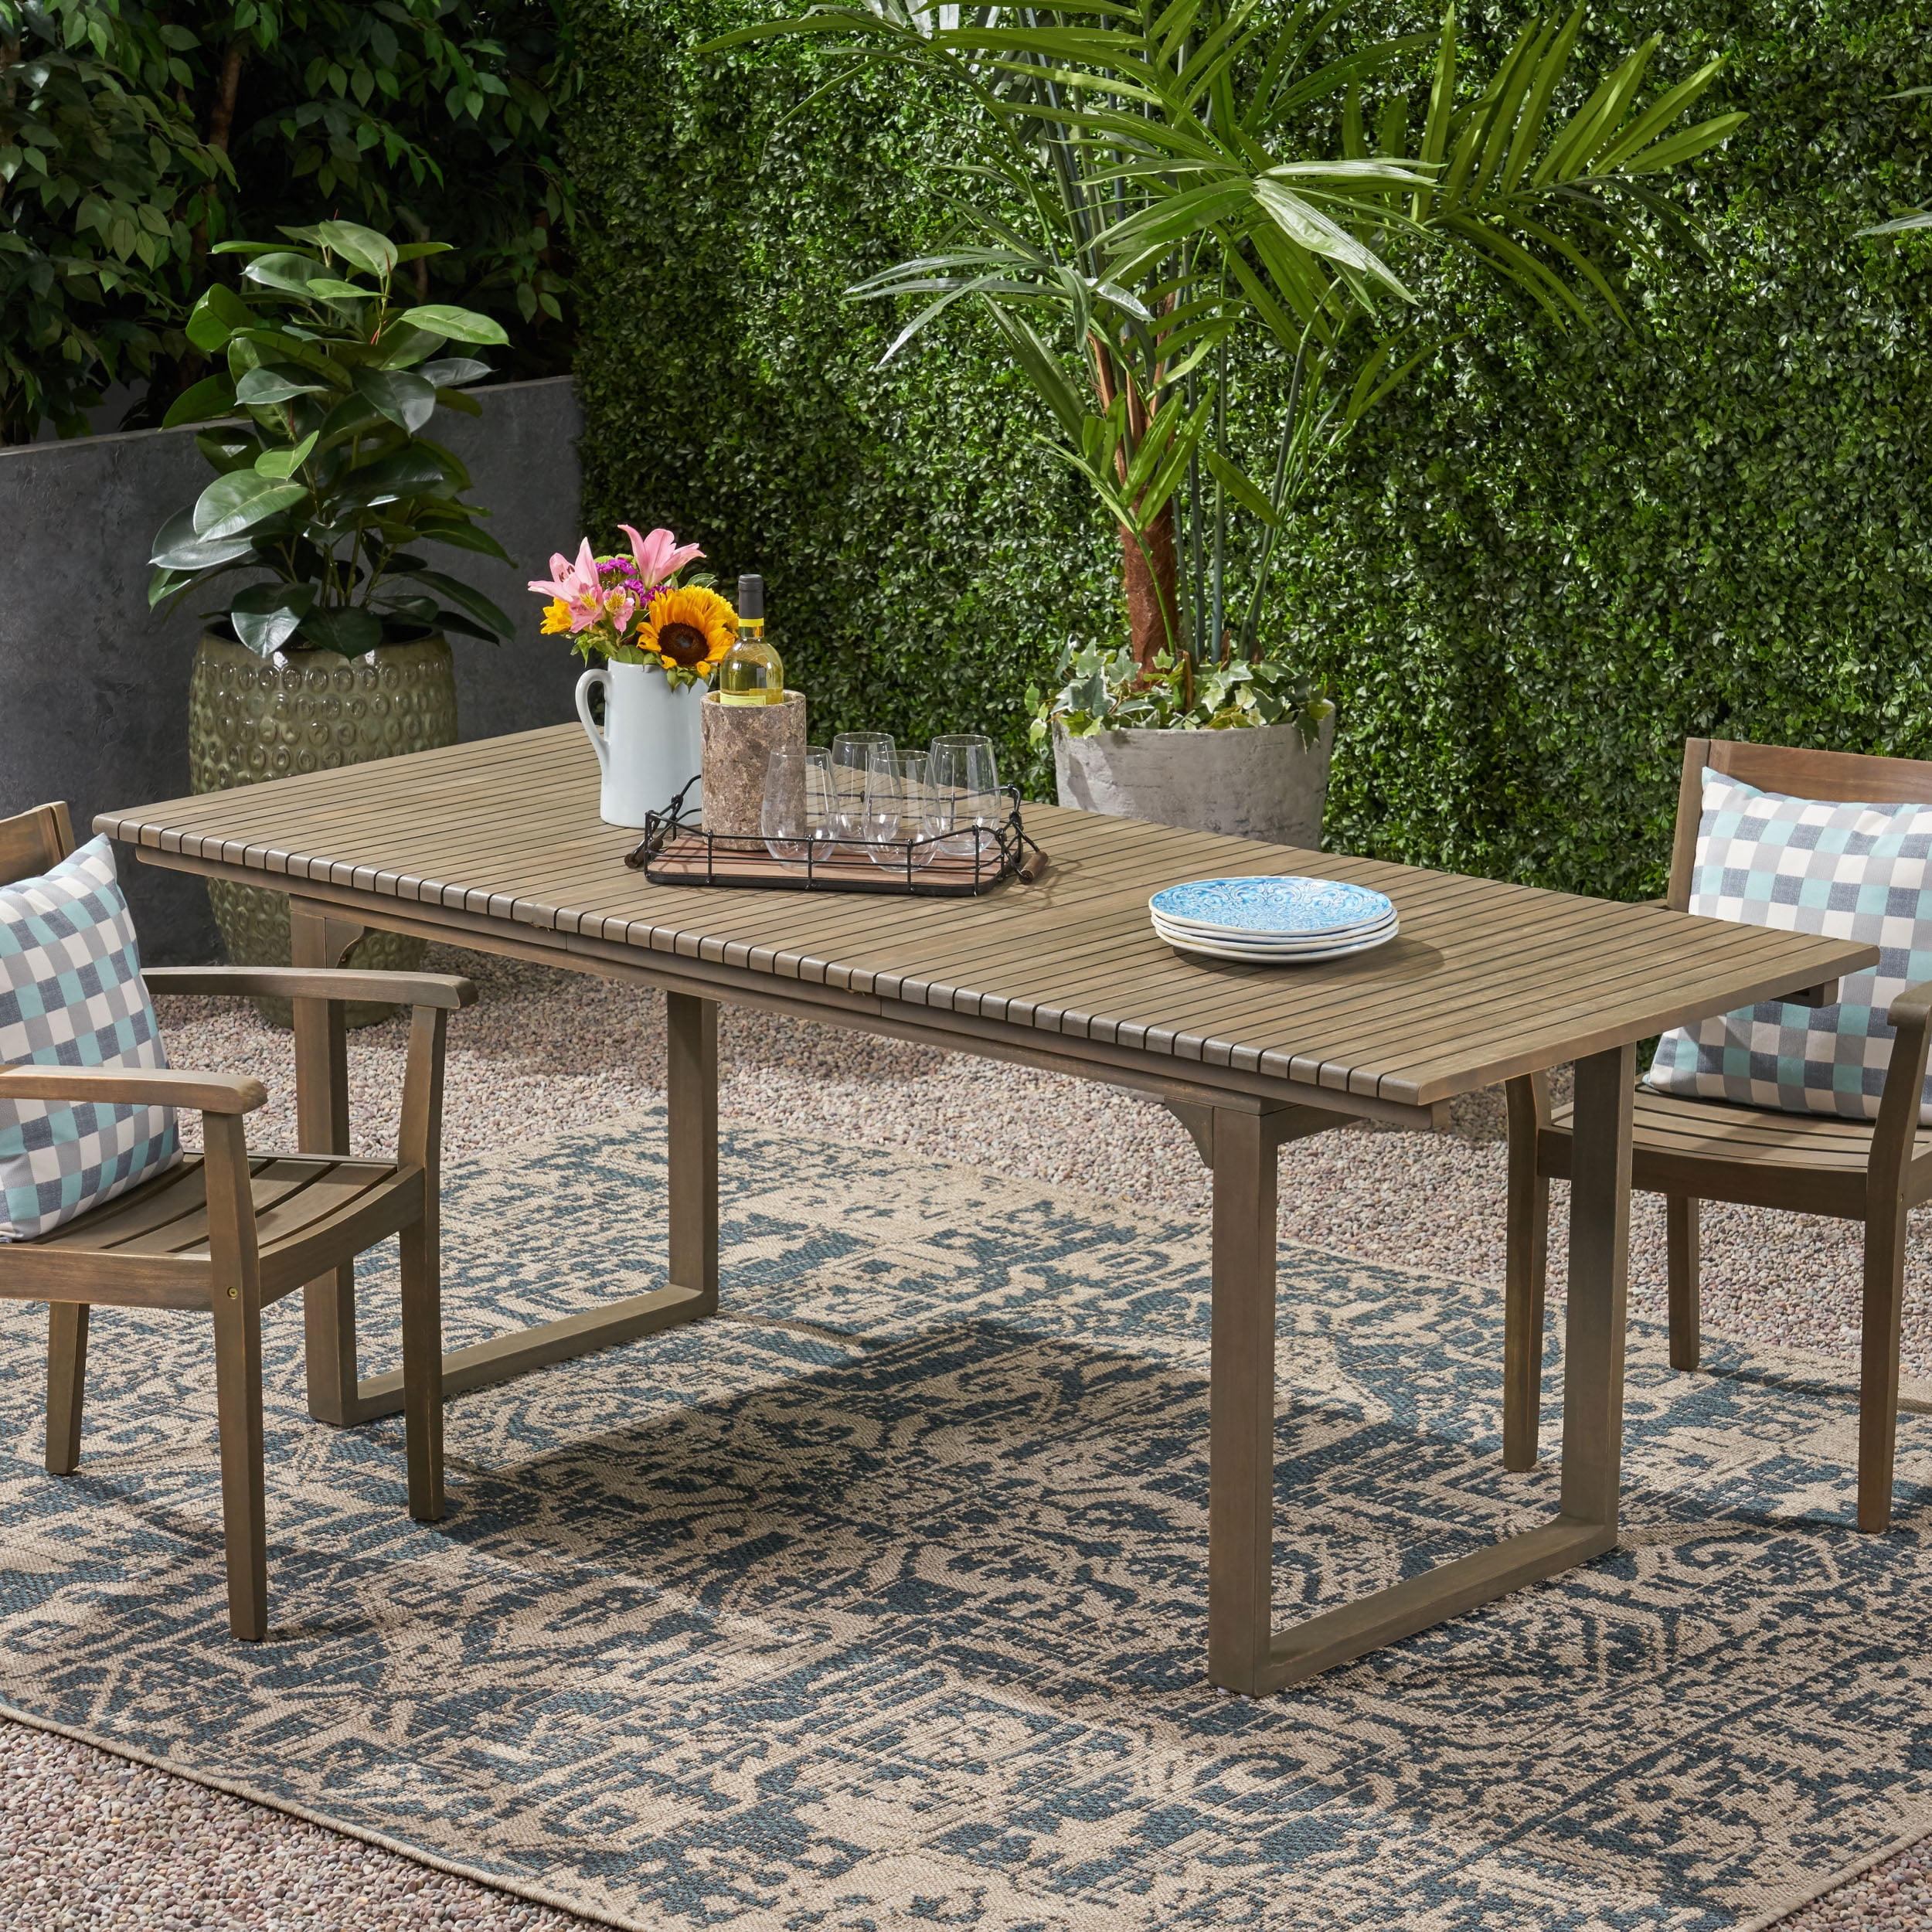 Christopher Outdoor Expandable Acacia Wood Dining Table, Gray - Walmart.com